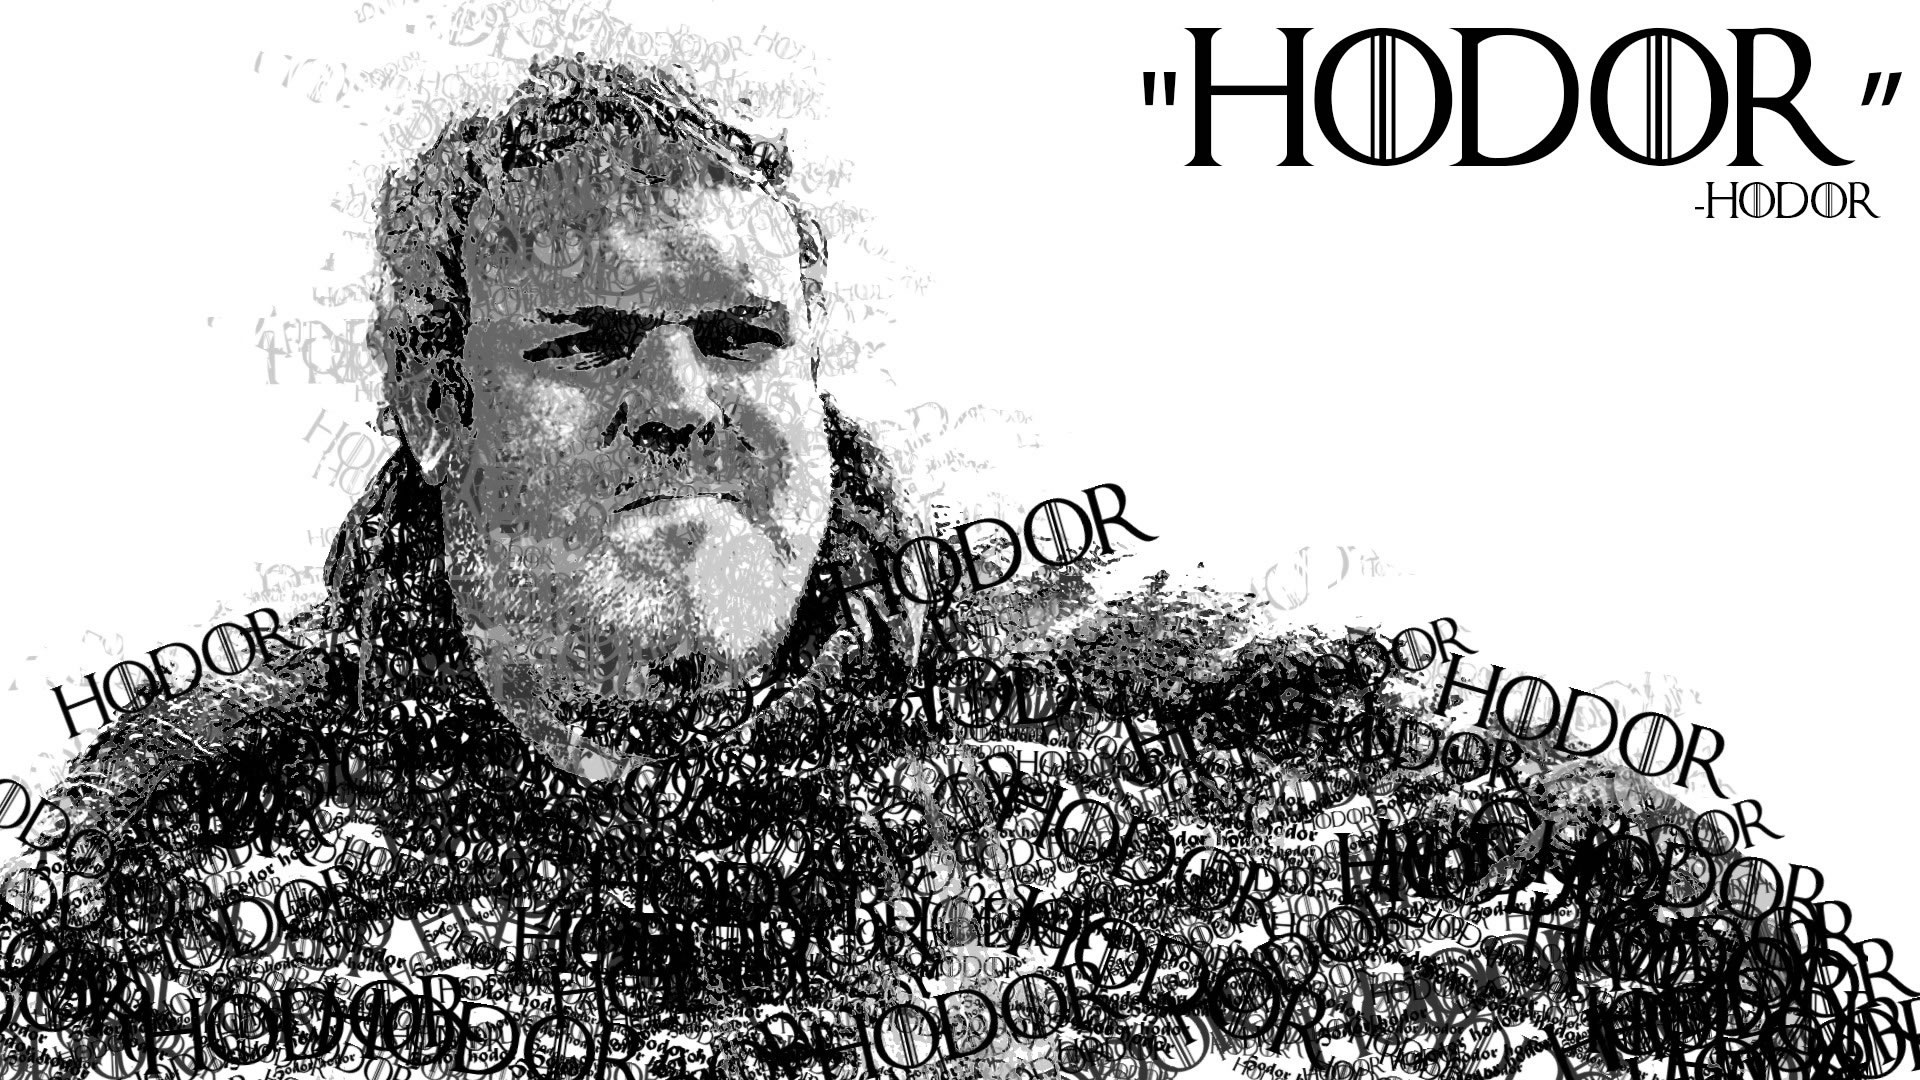 Game Of Thrones Quotes Hodor , HD Wallpaper & Backgrounds